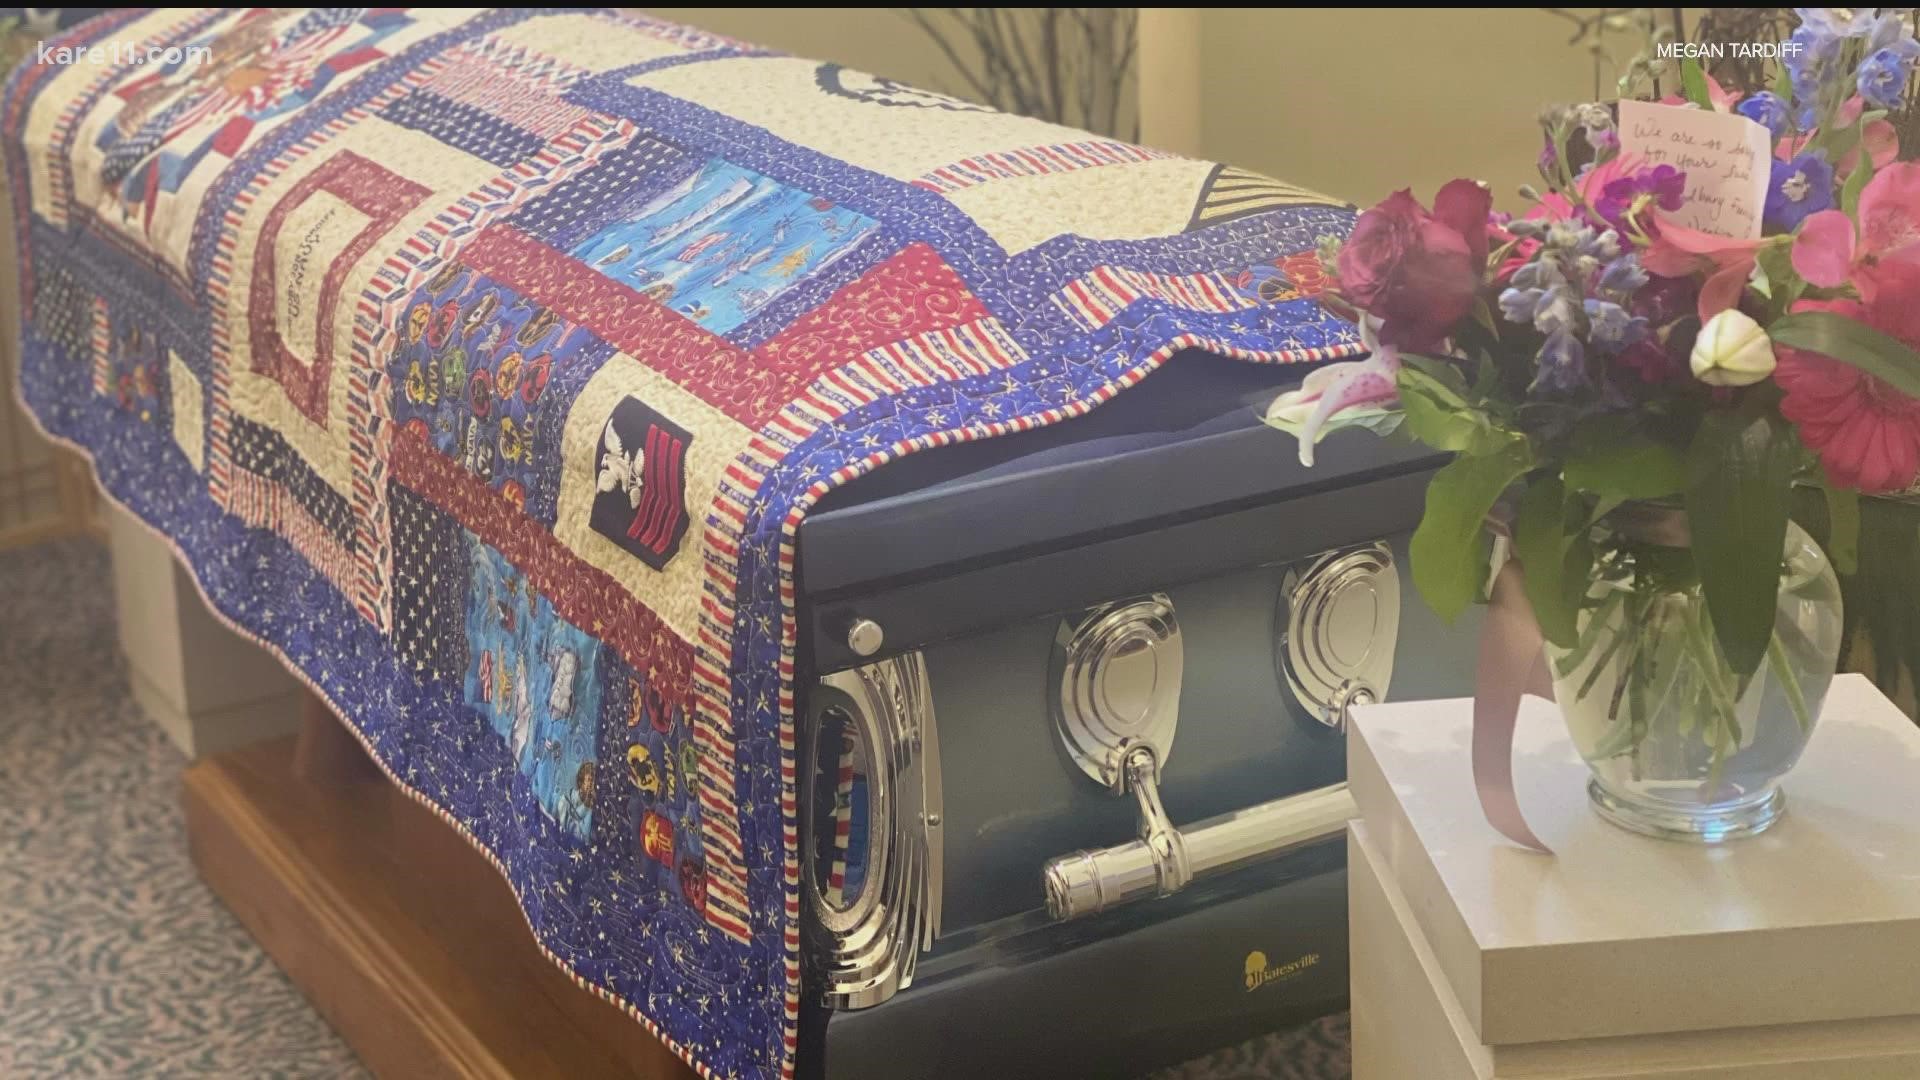 A family heirloom has been accidentally donated to a Goodwill store. The owner's family is asking for the public's help in finding it.